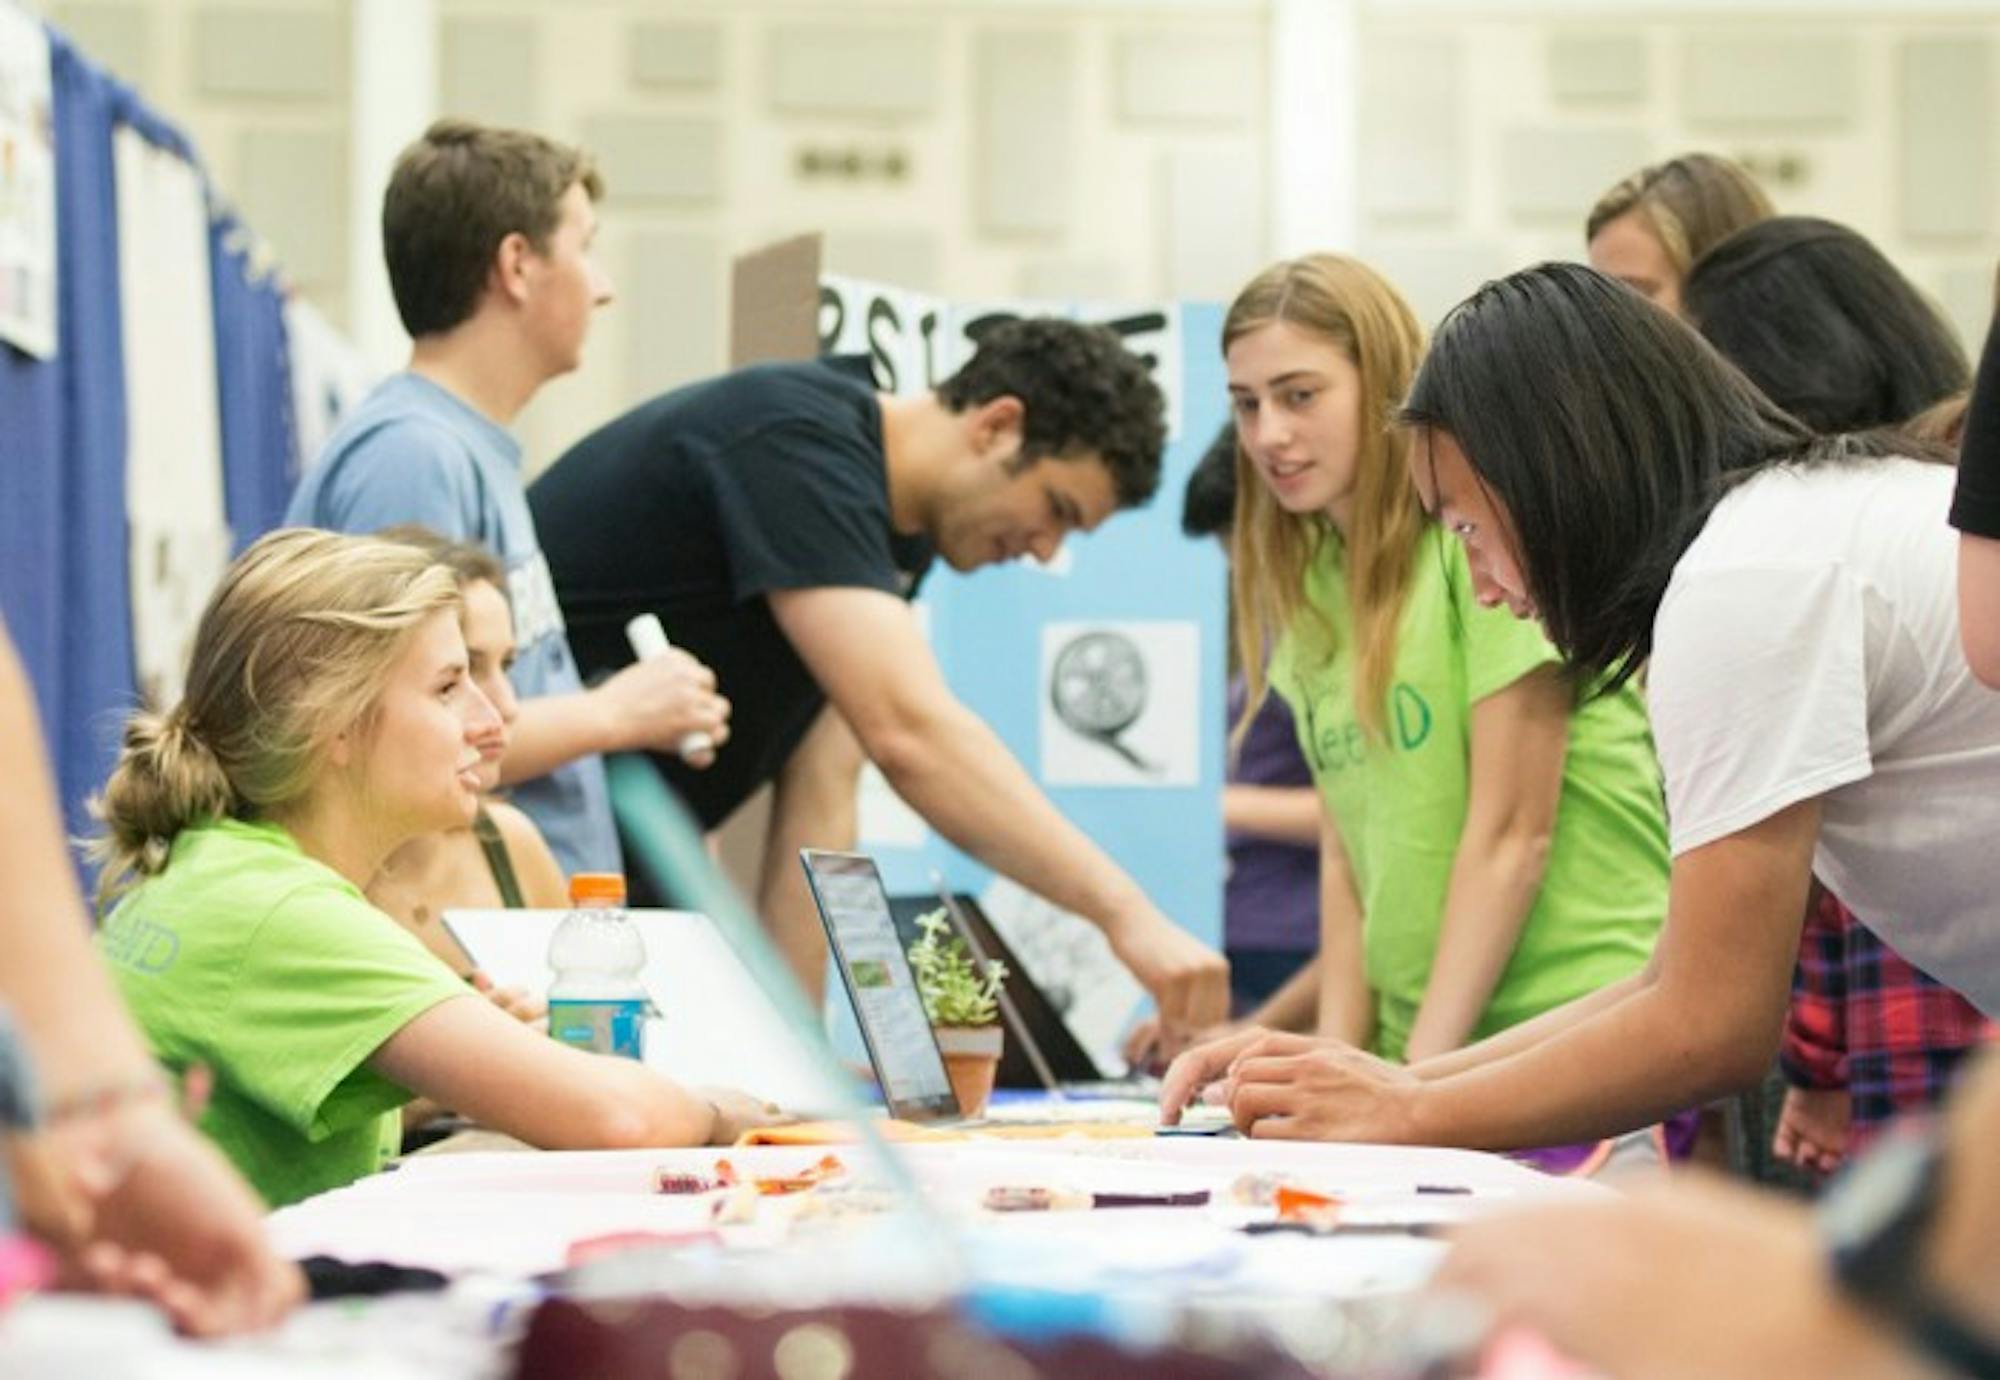 Members of GreeND recruit students at Tuesday's Activities night in the Joyce Center. Nearly 350 organizations had tables at the event, which was meant to help new students involved on campus.